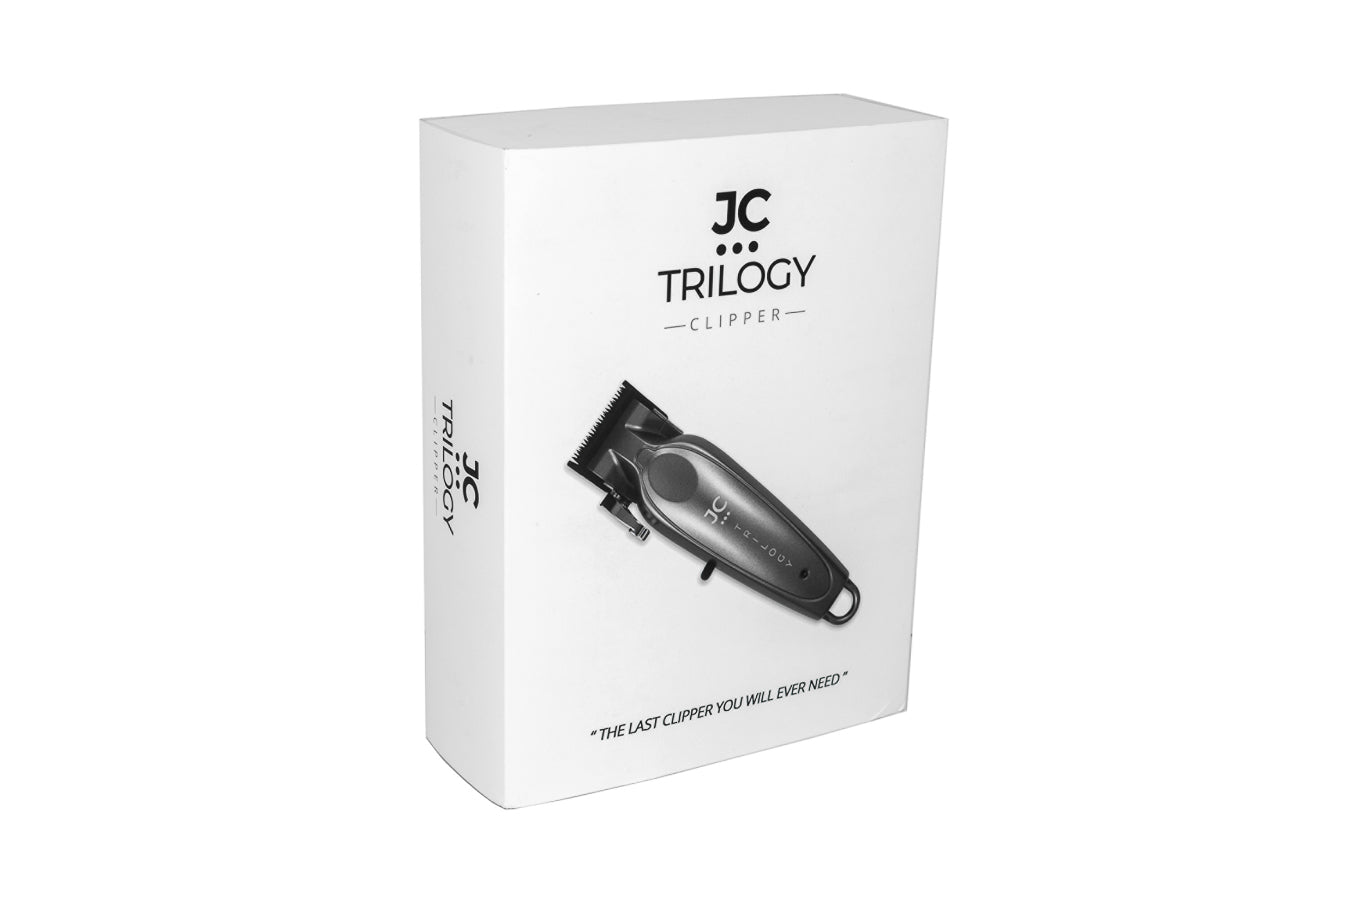 Global Scissors JC TRILOGY CLIPPER - Cordless Rechargeable 2-3hr Runtime